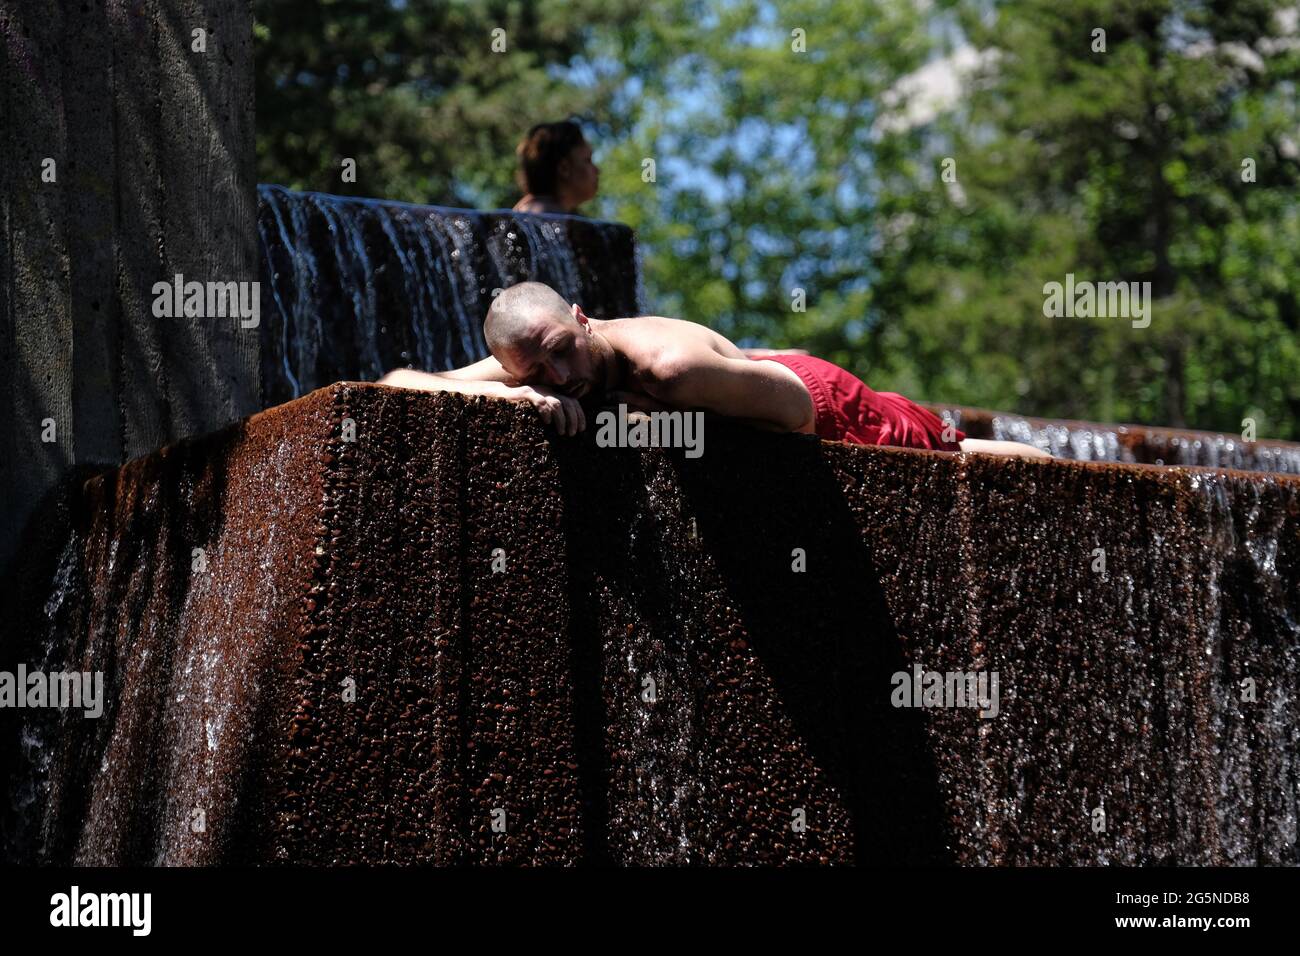 Portland, USA. 28th June, 2021. A man cools off at Keller Fountain Park in Portland, Ore., on June 28, 2021, where temperatures reached an all time high of 116 degrees Fahrenheit. (Photo by Alex Milan Tracy/Sipa USA) Credit: Sipa USA/Alamy Live News Stock Photo